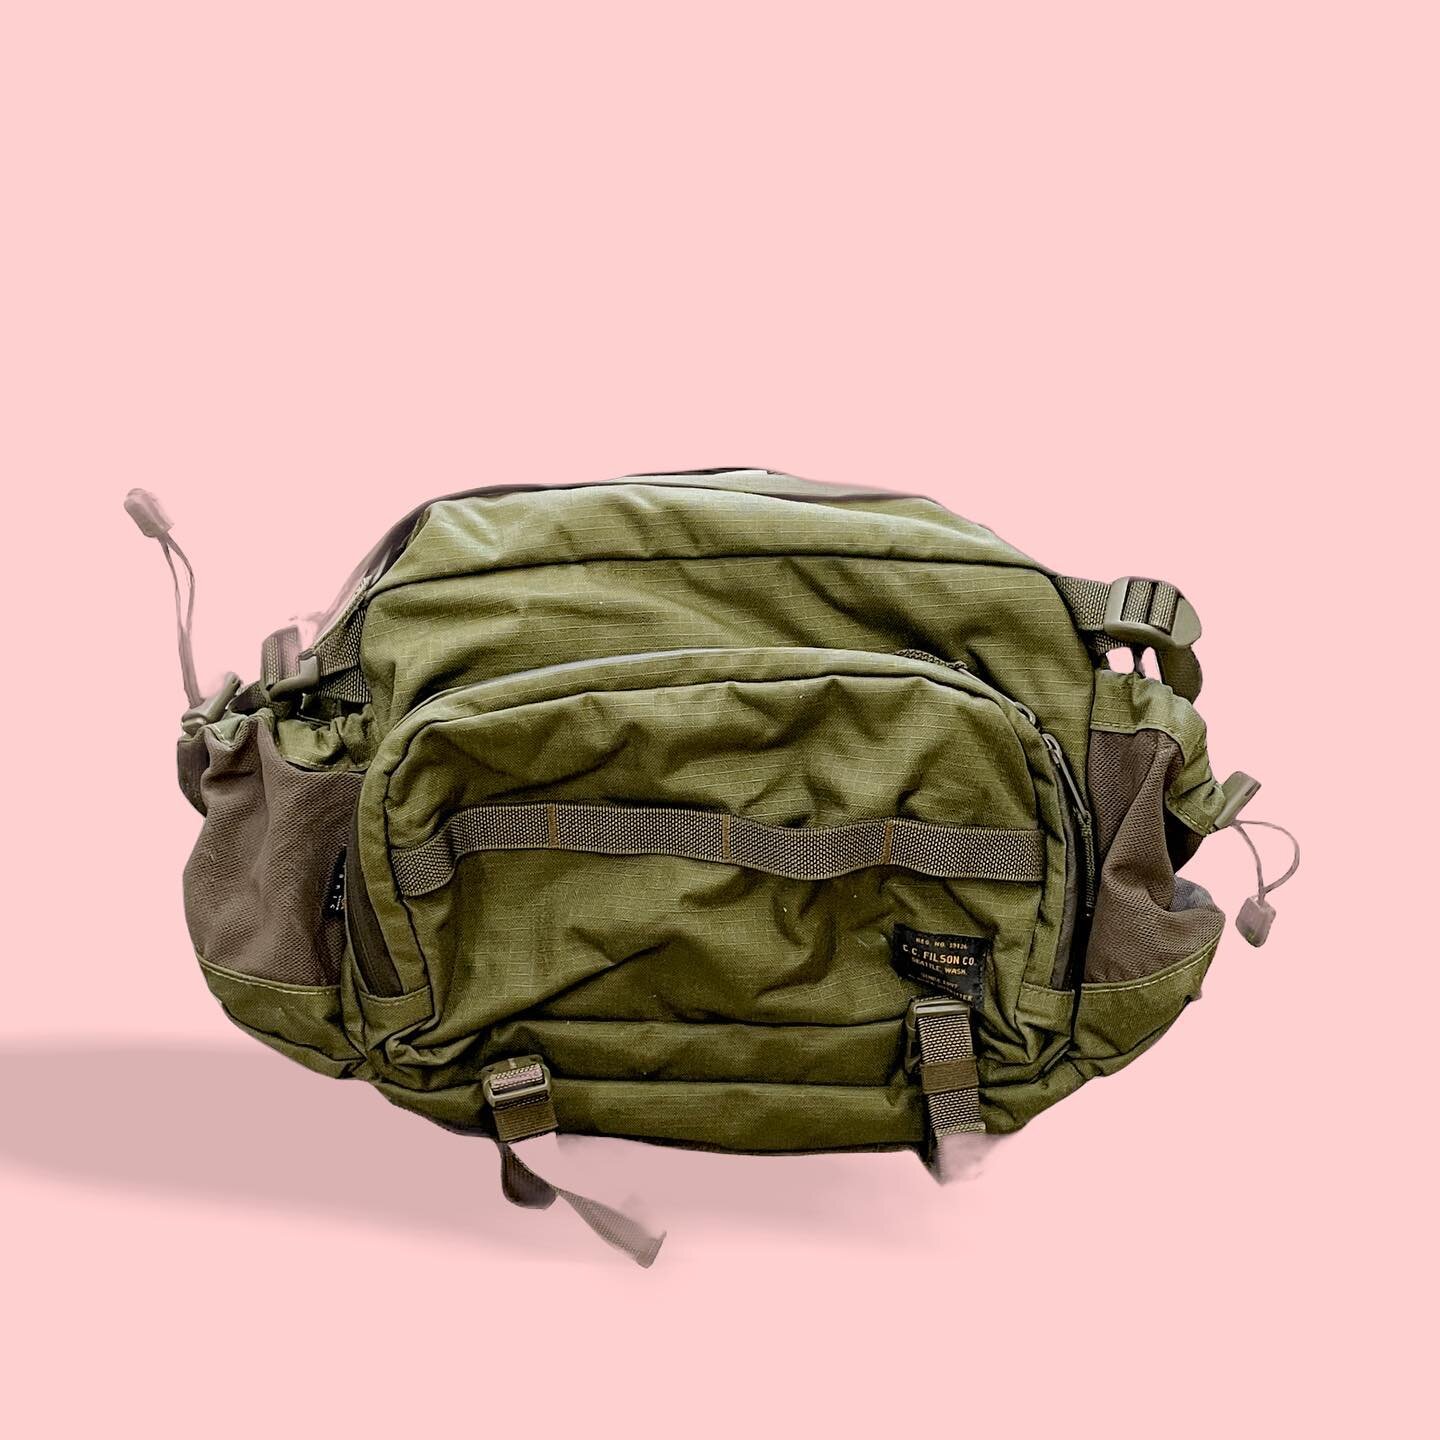 Carry all the bits and bobs with none of the sweaty back!

Filson Fanny Pack
MSRP: $175
Cc: $78